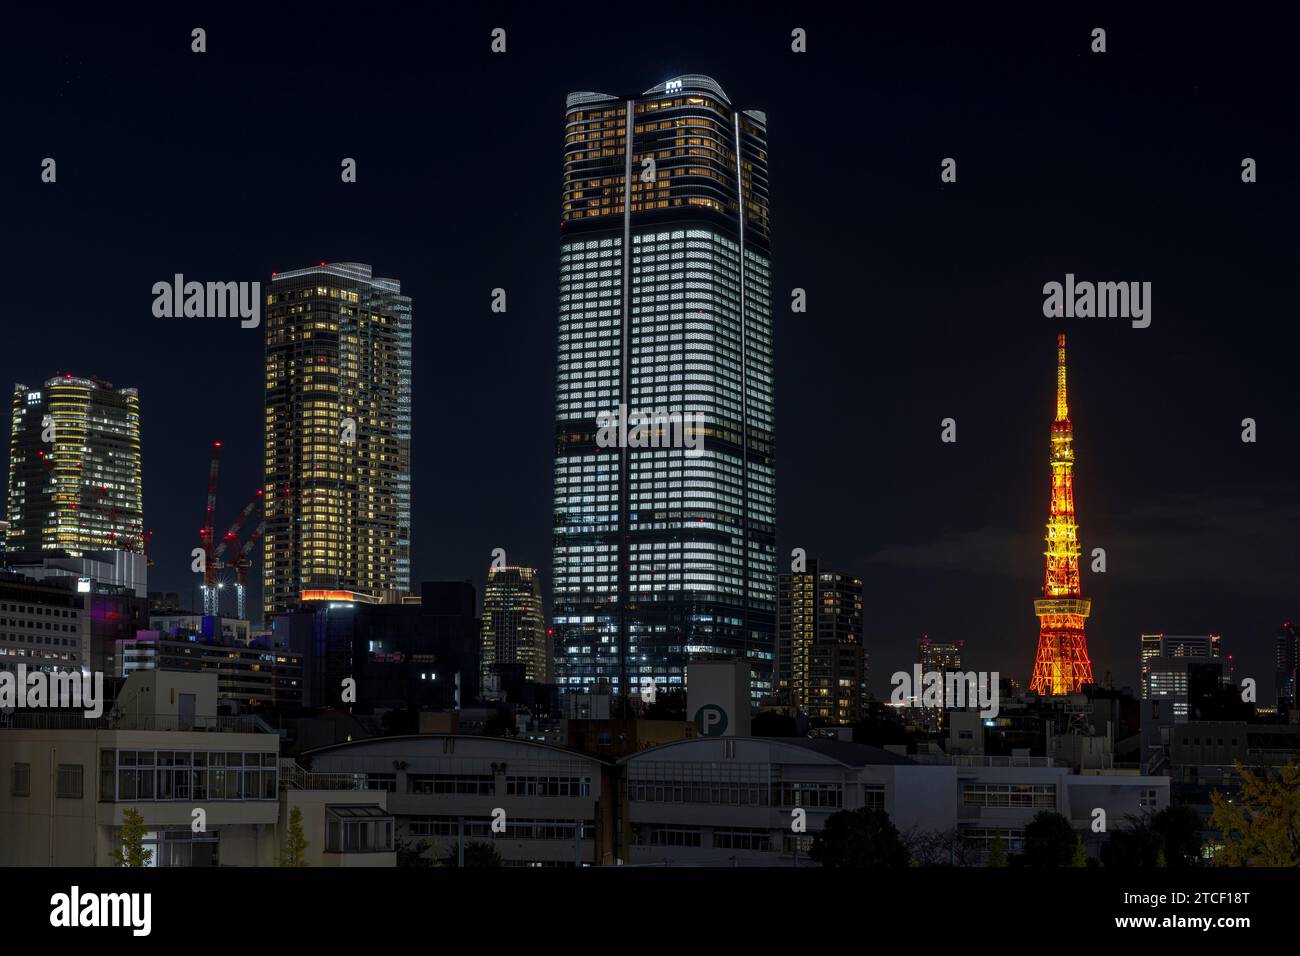 night view of the famous Tokyo tower and other skyscrapers Stock Photo